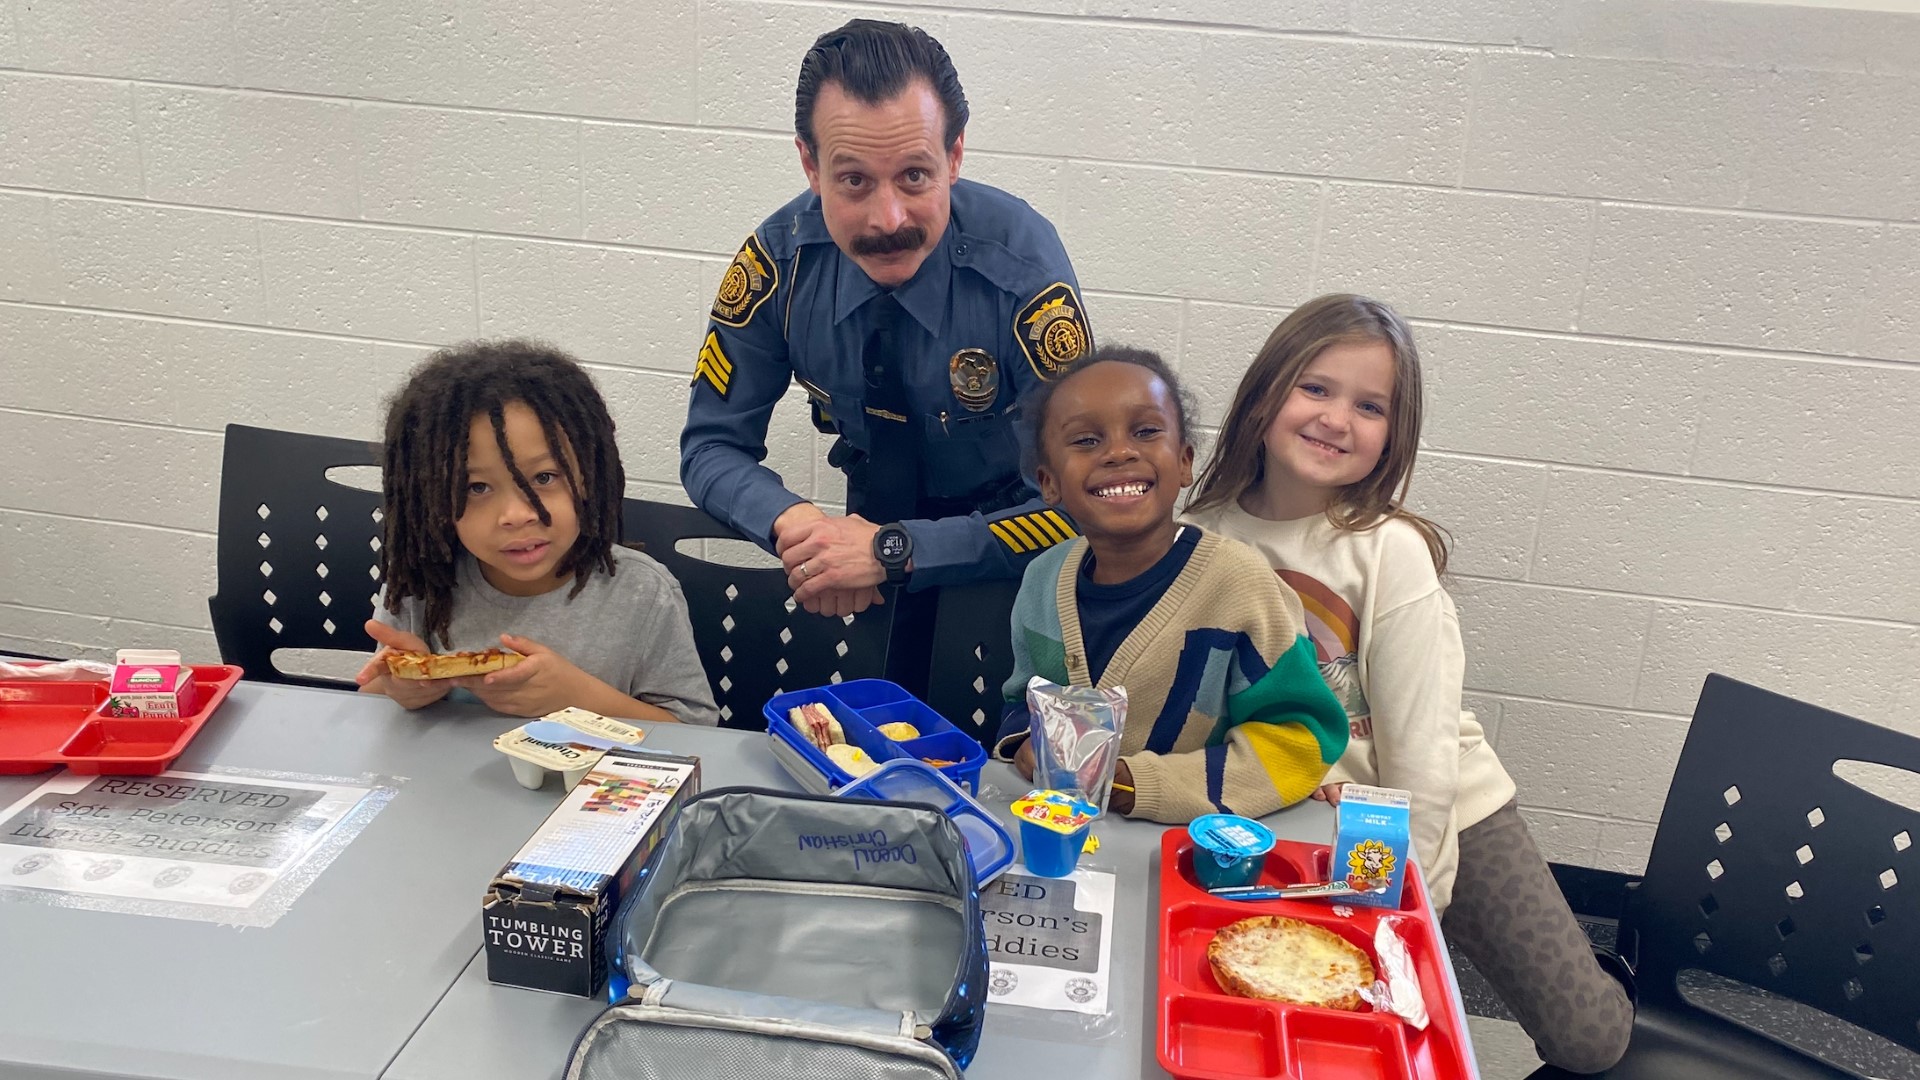 A school resource officer has become the most popular dining companion at a Bartow County elementary school.